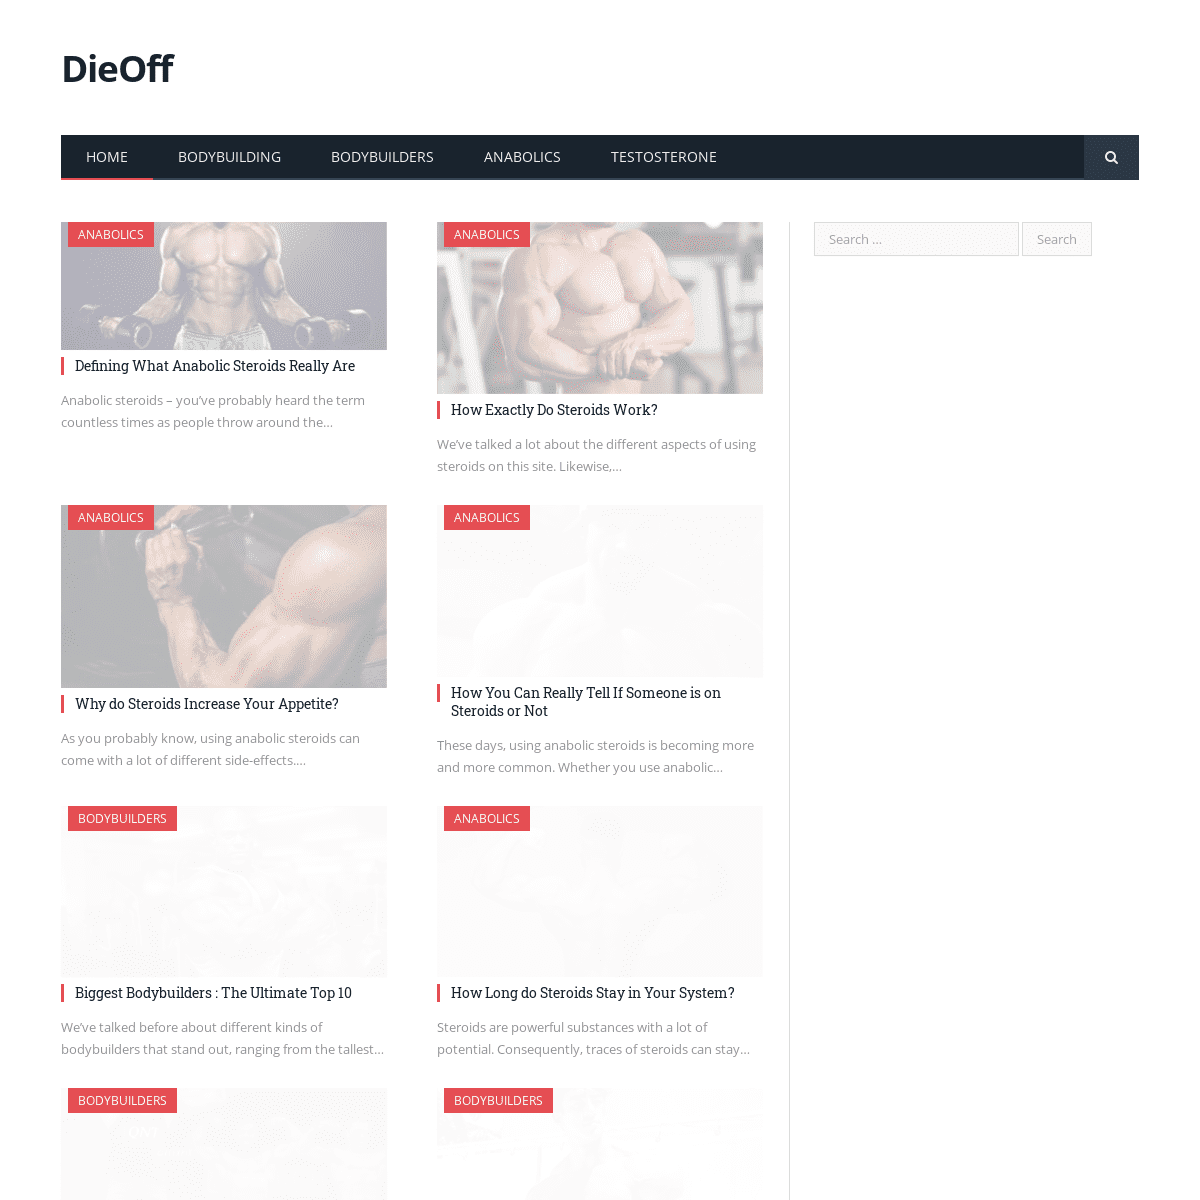 A complete backup of dieoff.org